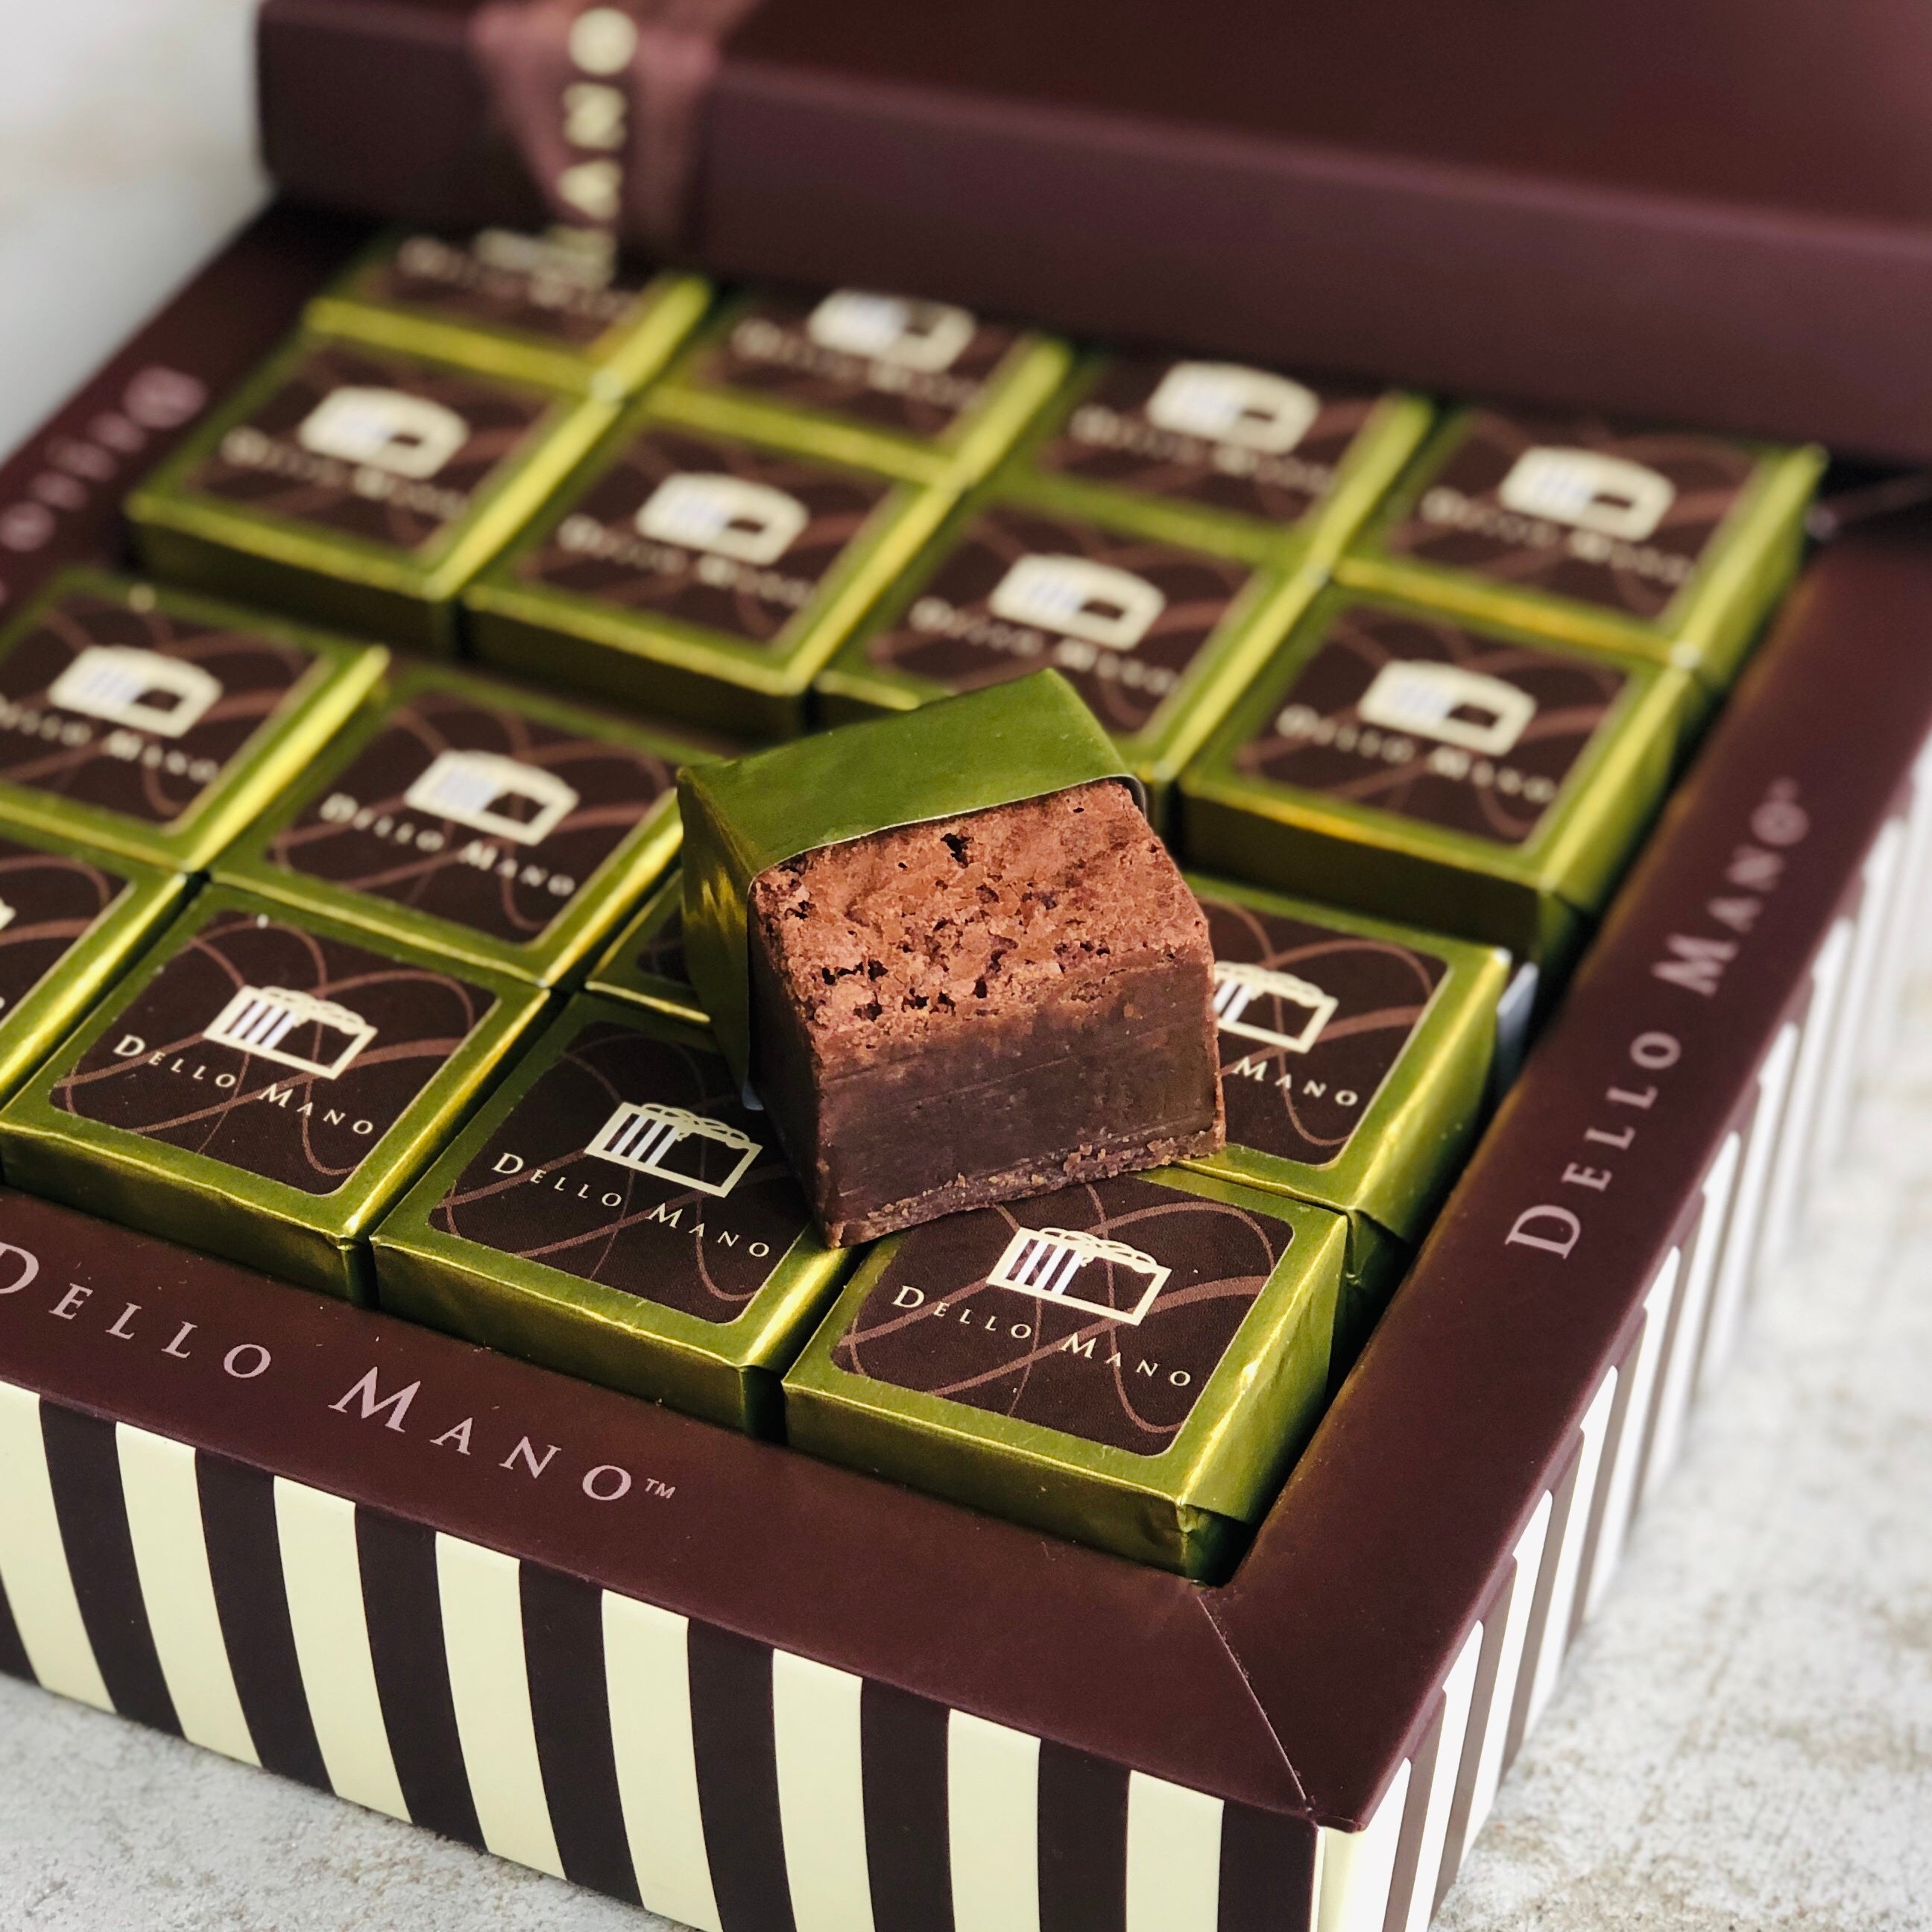 Classic gold foil brownie cubes in a striped chocolate gift box that says Dello Mano. An open foil brownie sits on top